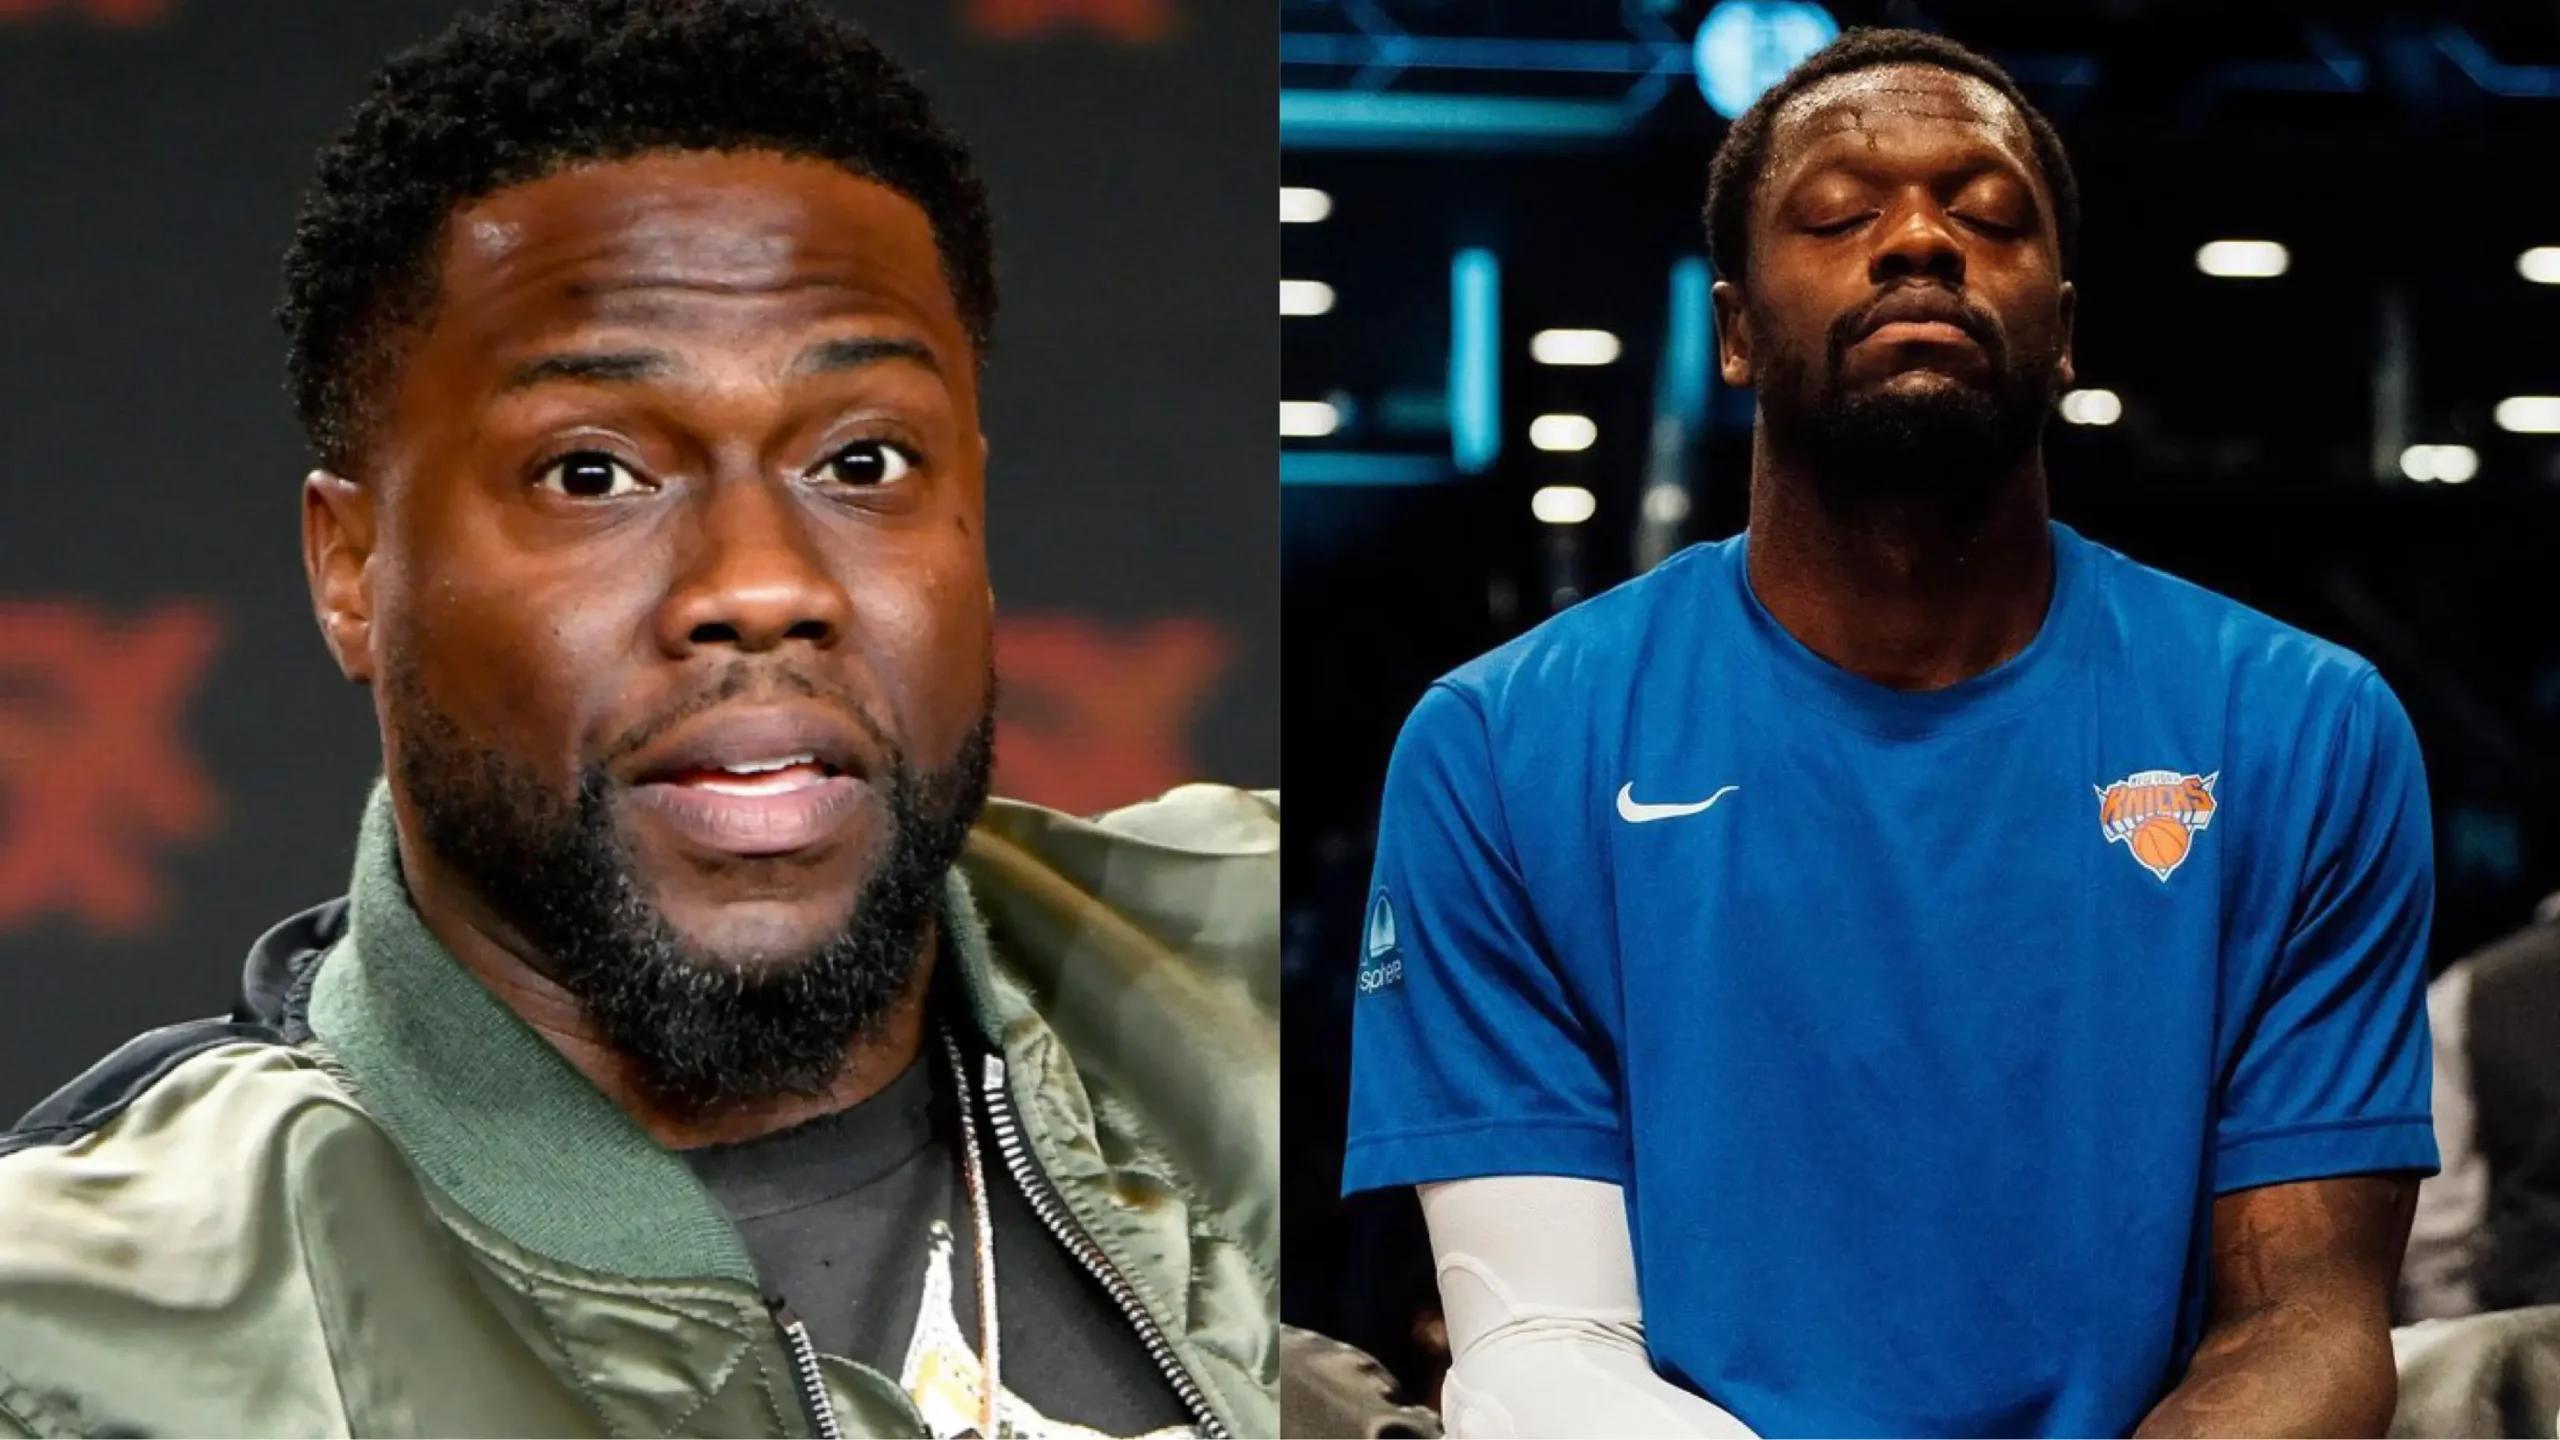 Get Your Fat A Off My Show: Kevin Hart Shuts Down Knicks Julius Randle Over This Offensive Philadelphia Insult [Video]